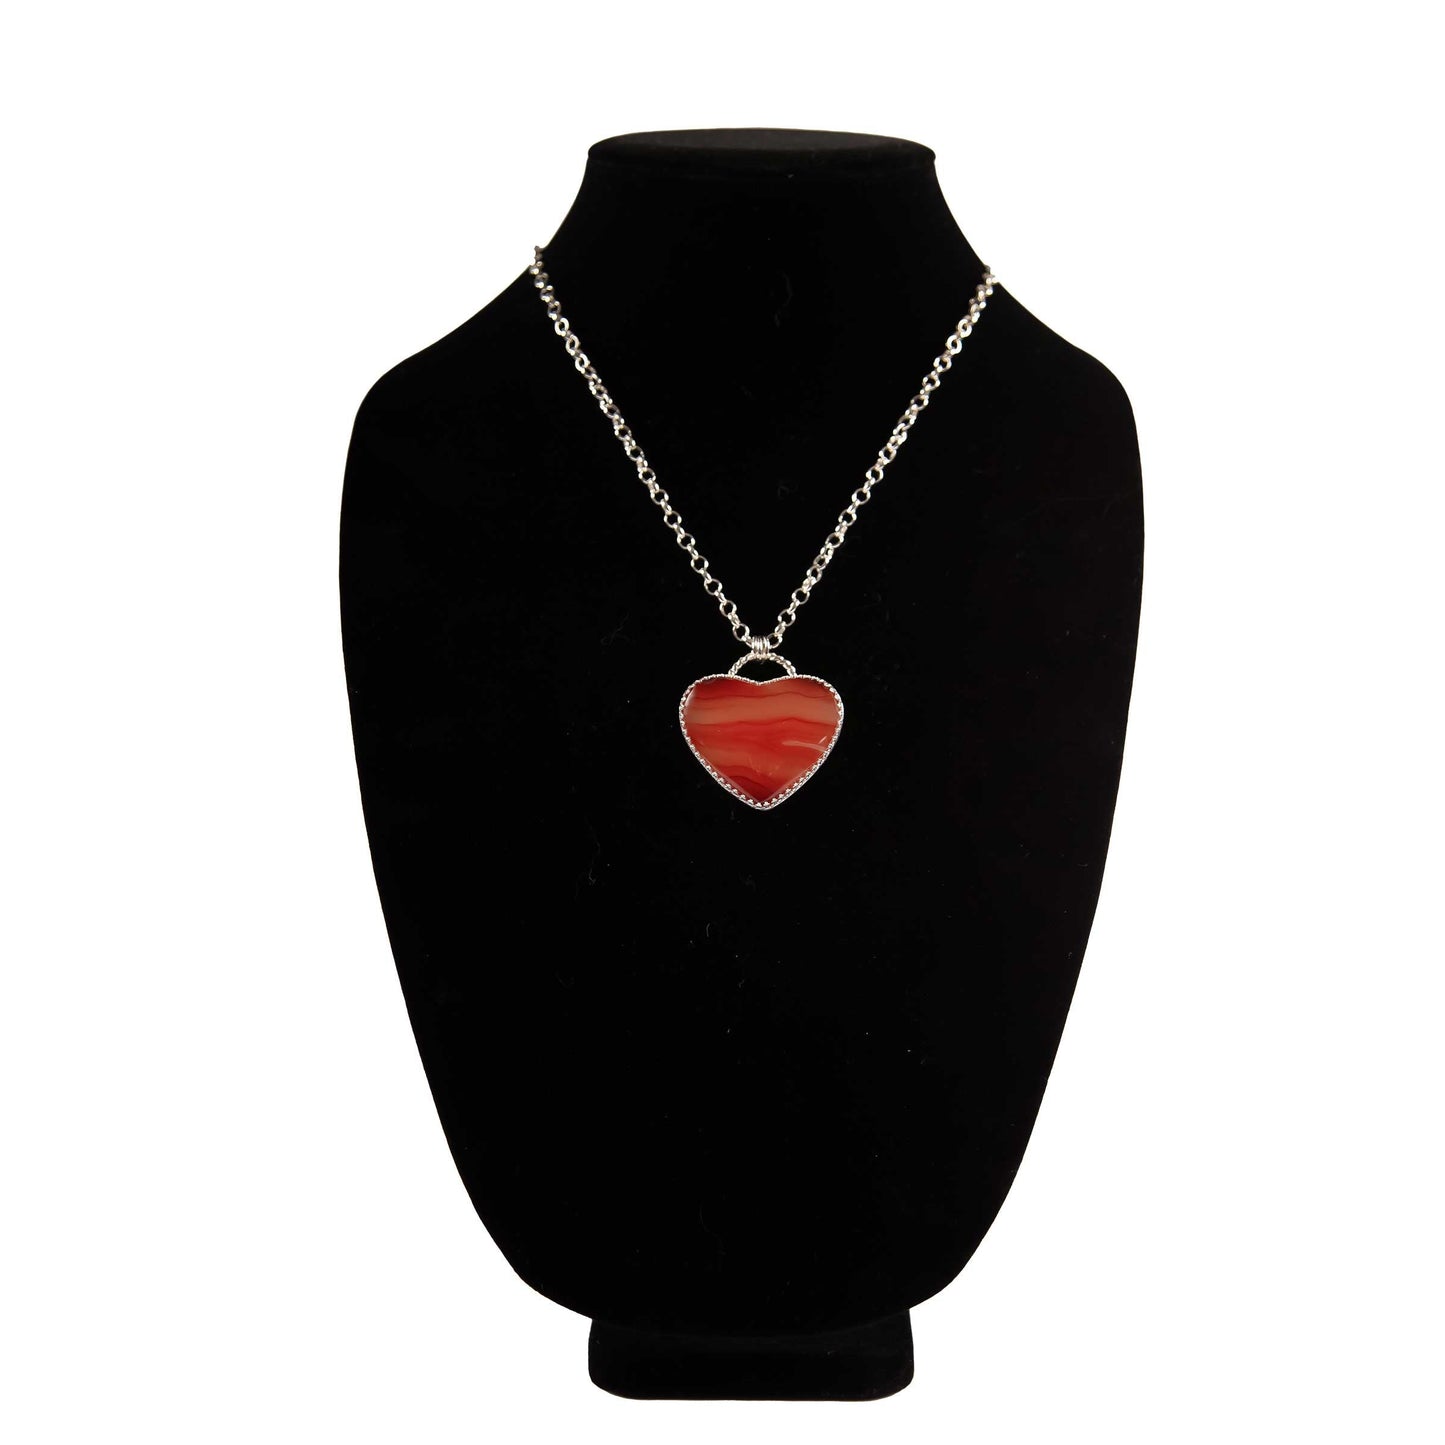 large, heart-shaped, Carnelian stone, sterling silver, textured back, 20-inch Rolo chain and clasp, Carnelian,Heart-Shaped, Pendant, 1.5" x 1.5"